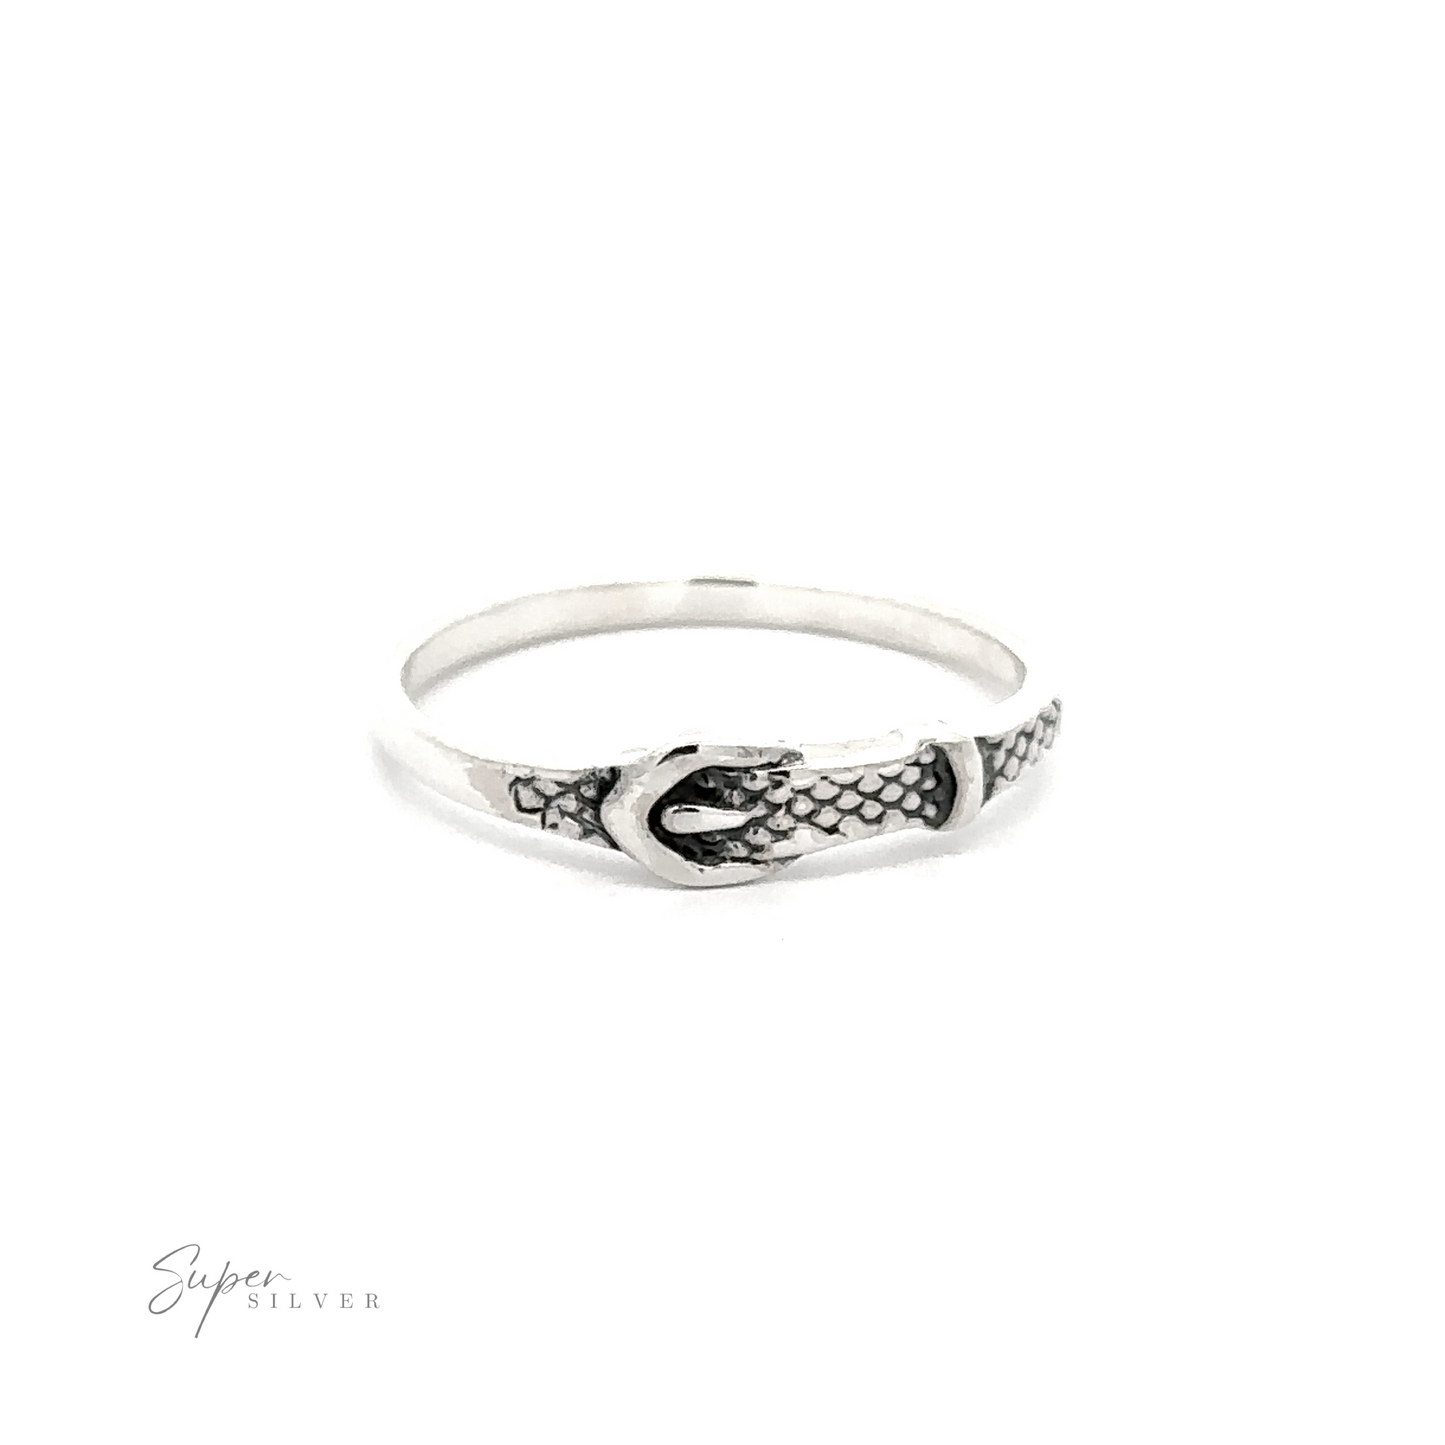 A vintage-styled Small Belt ring with a silver snake on it.